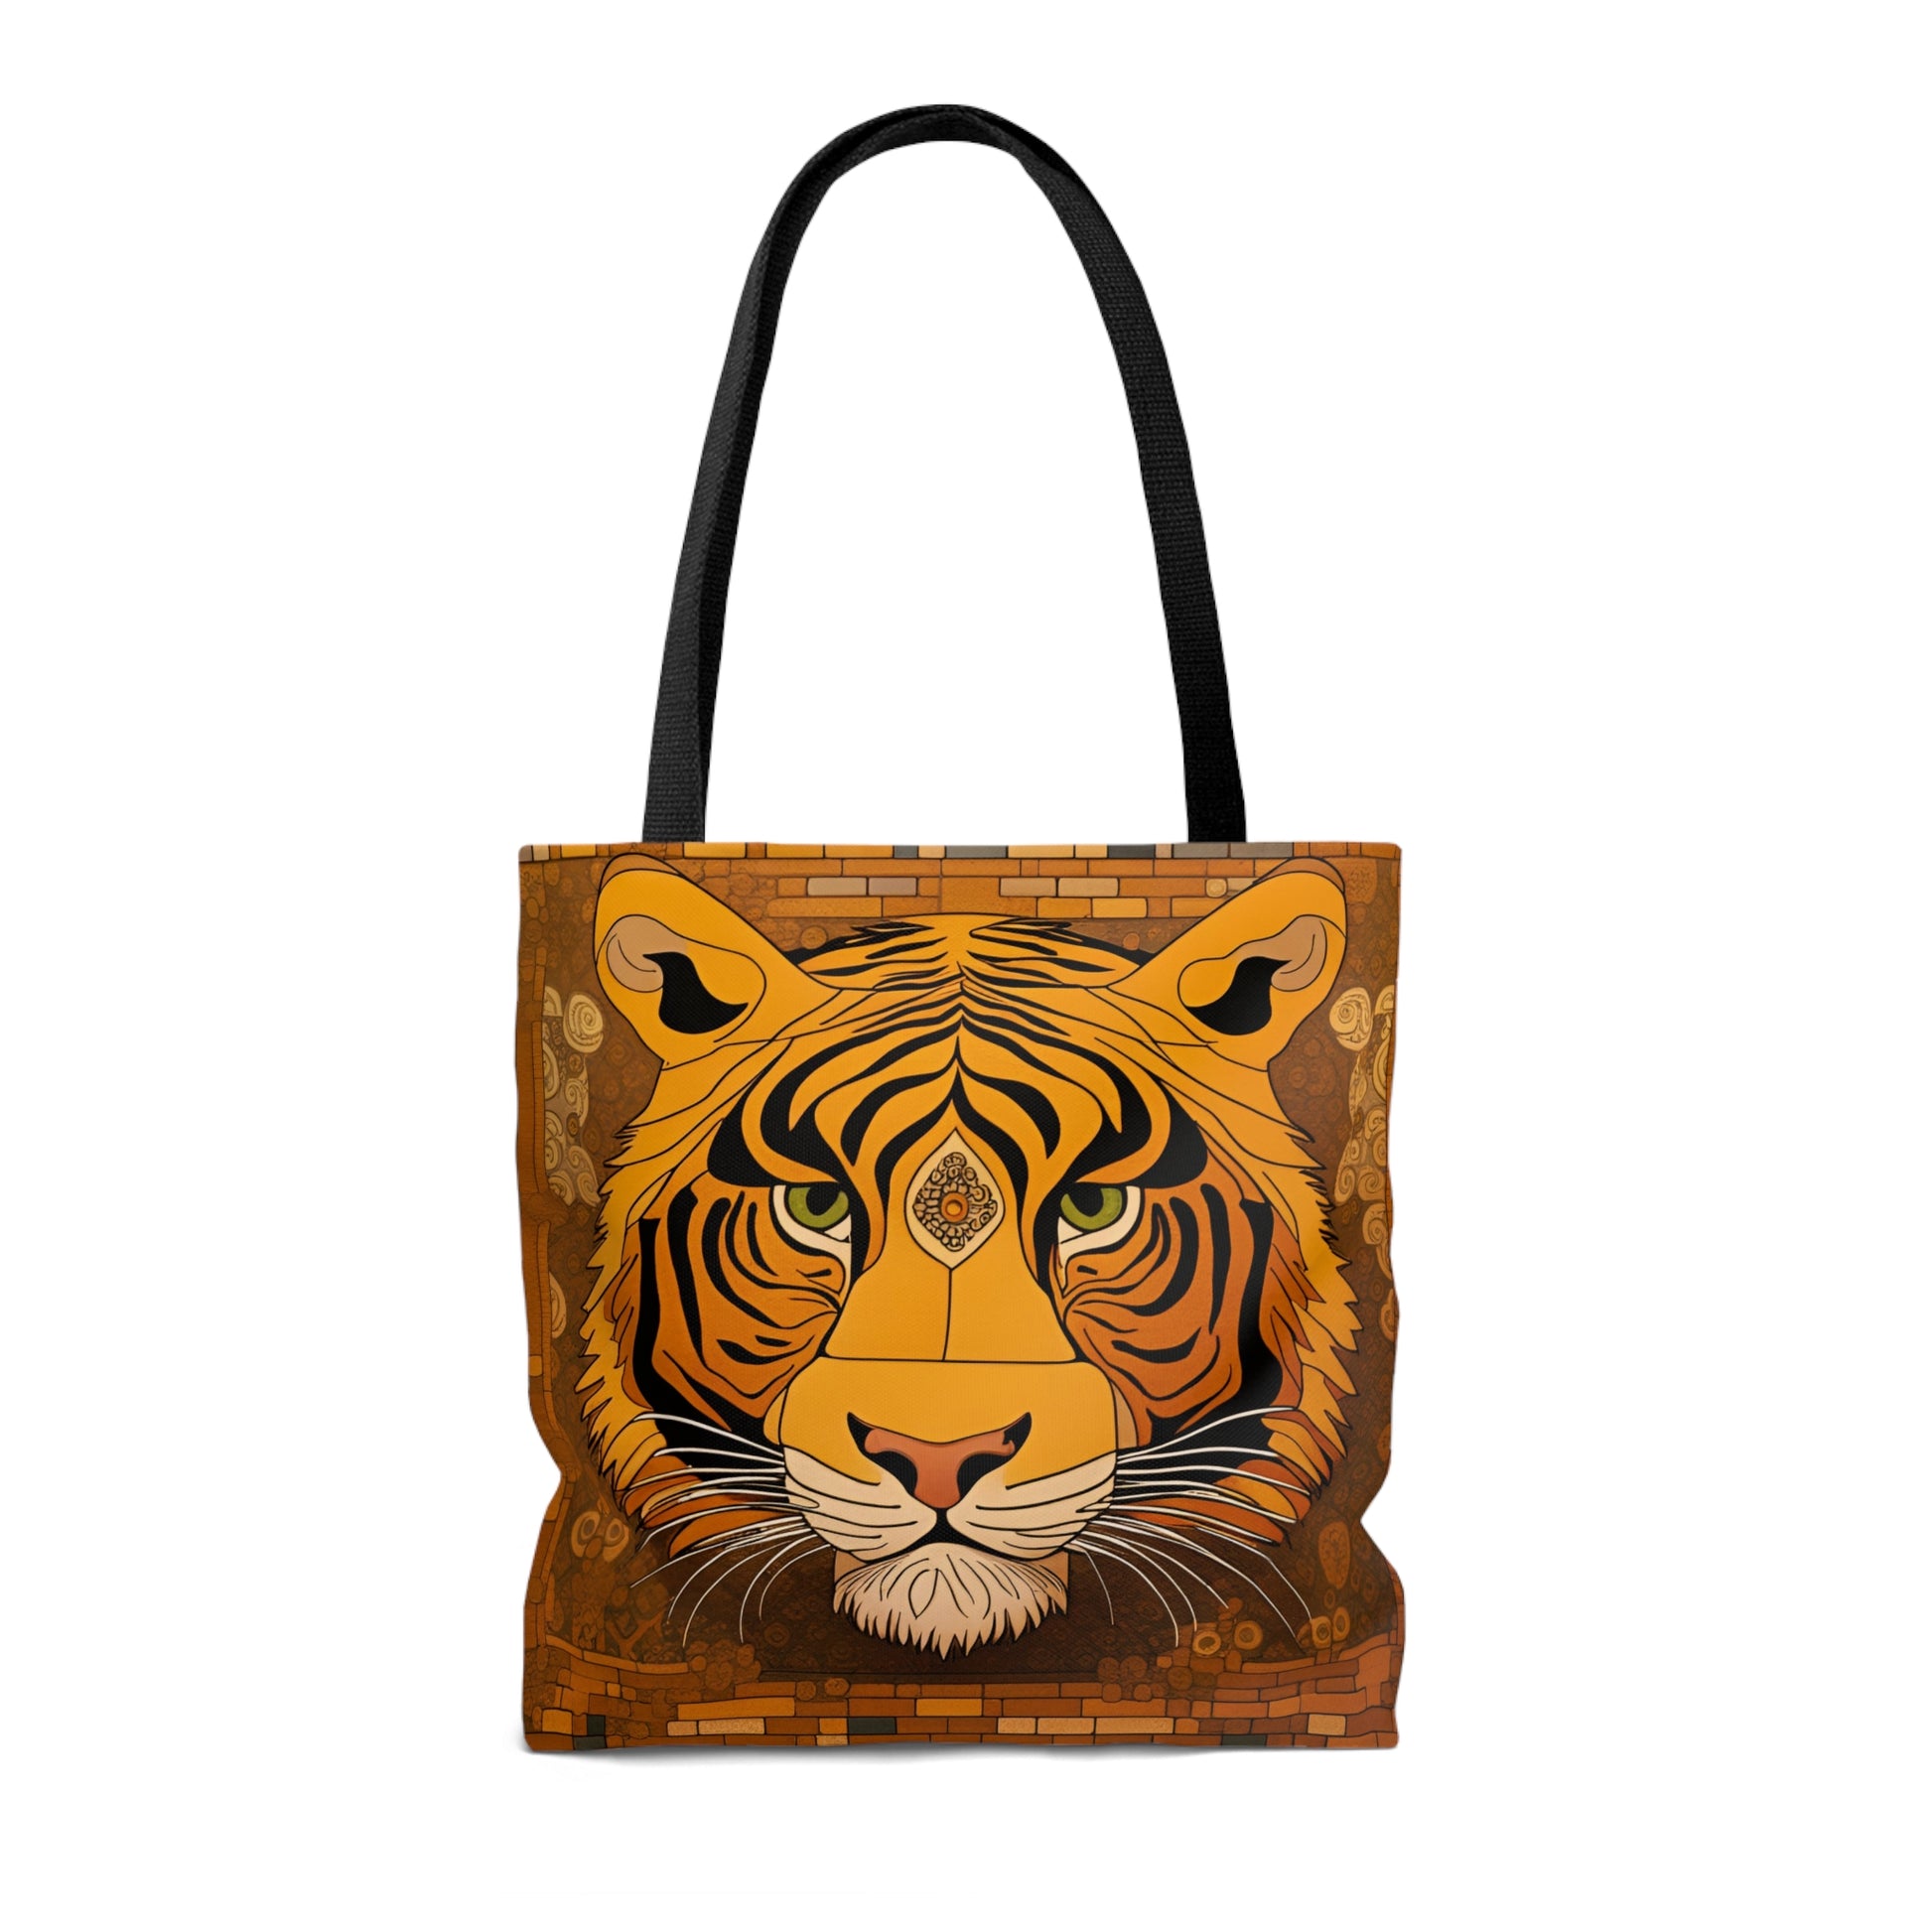 Tiger Head in the Style of Gustav Klimt Printed on Tote Bag back